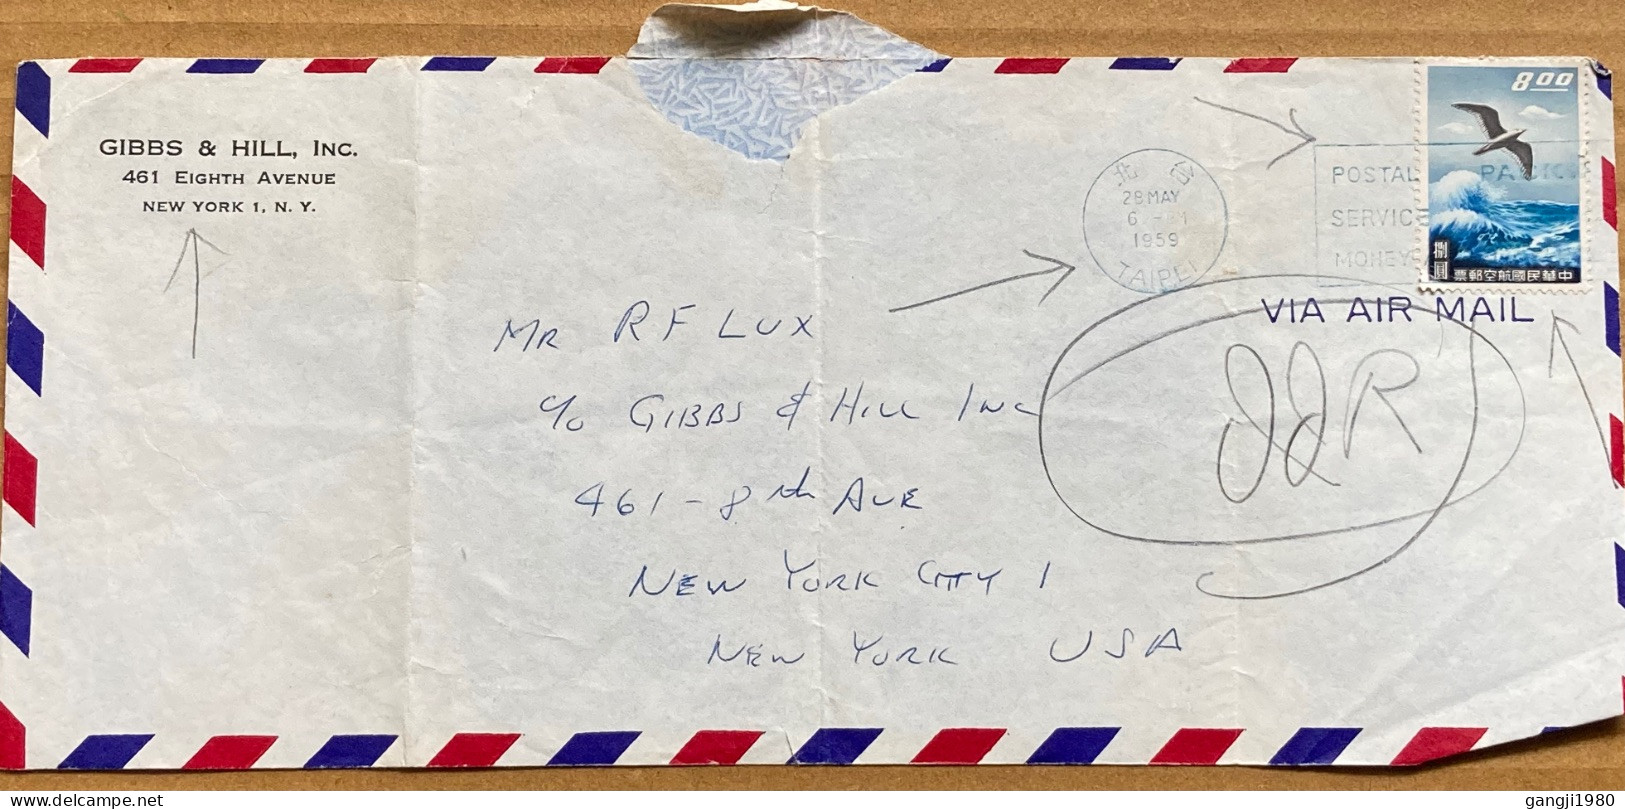 CHINA TAIWAN 1959, COVER USED TO USA, EARLY METER MACHINE, BLUE SLOGAN, POSTAL SERVICE MONEY, SEAGULL BIRD, GIBB'S & HIL - Storia Postale